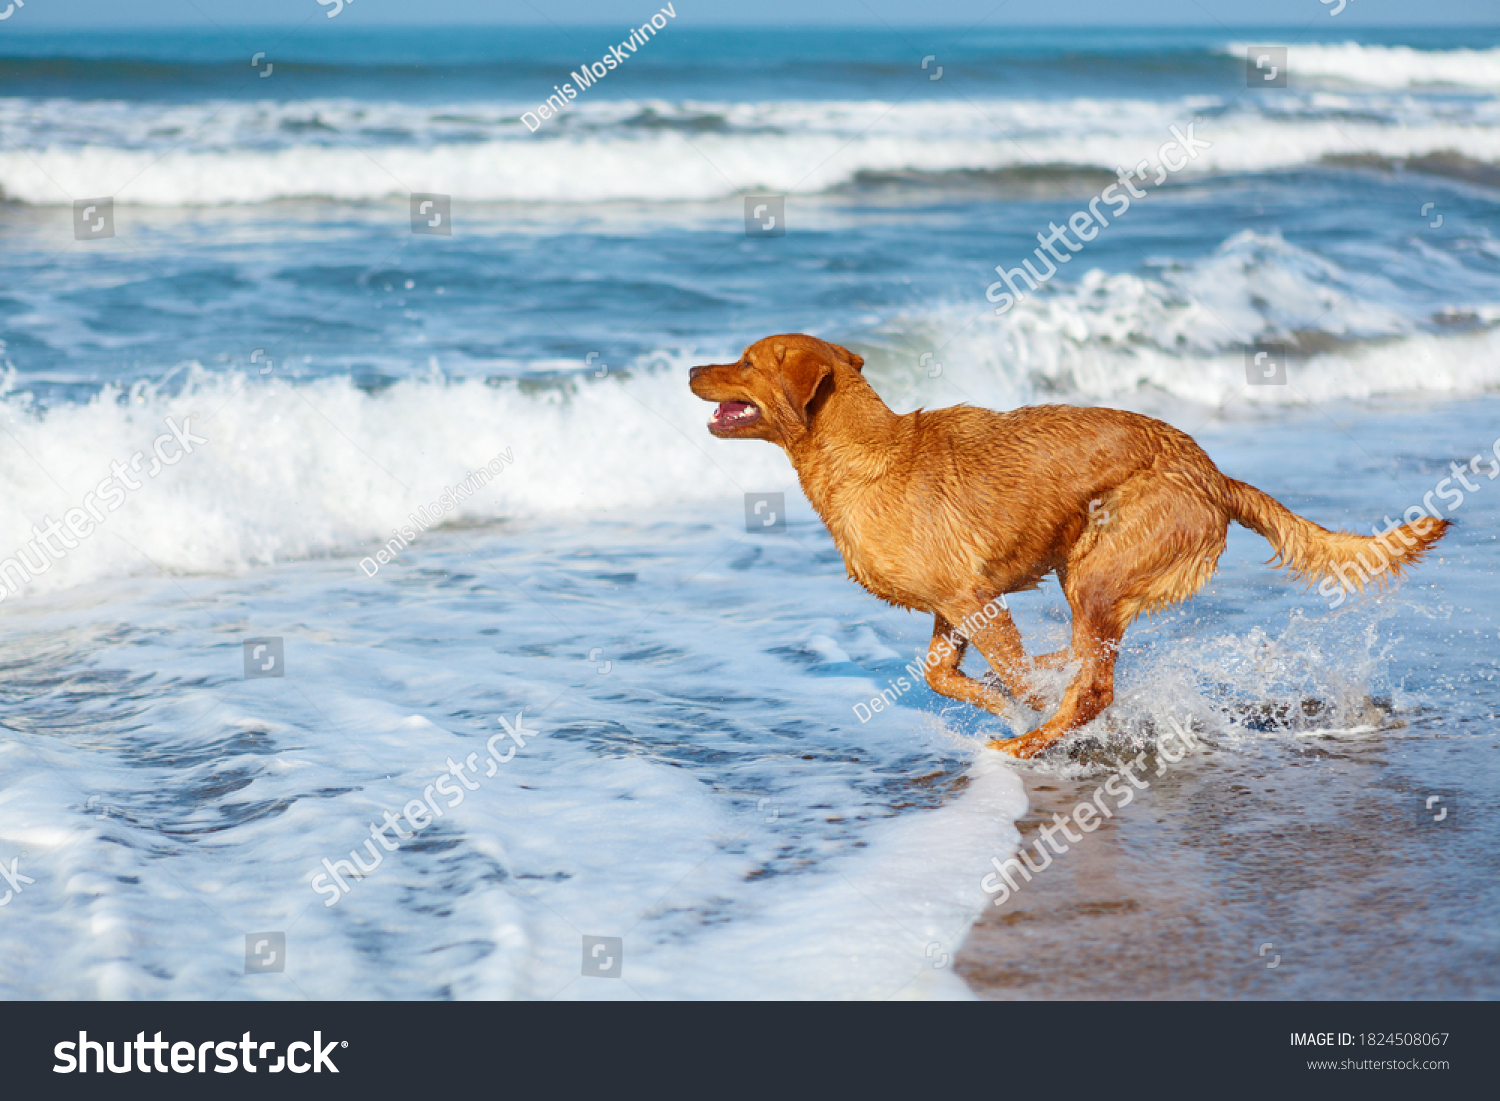 Photo of golden retriever walking on sand beach. Happy dog wet after swimming run with water splashes along sea surf. Actions, training games with family pets and popular dog breeds on summer vacation #1824508067